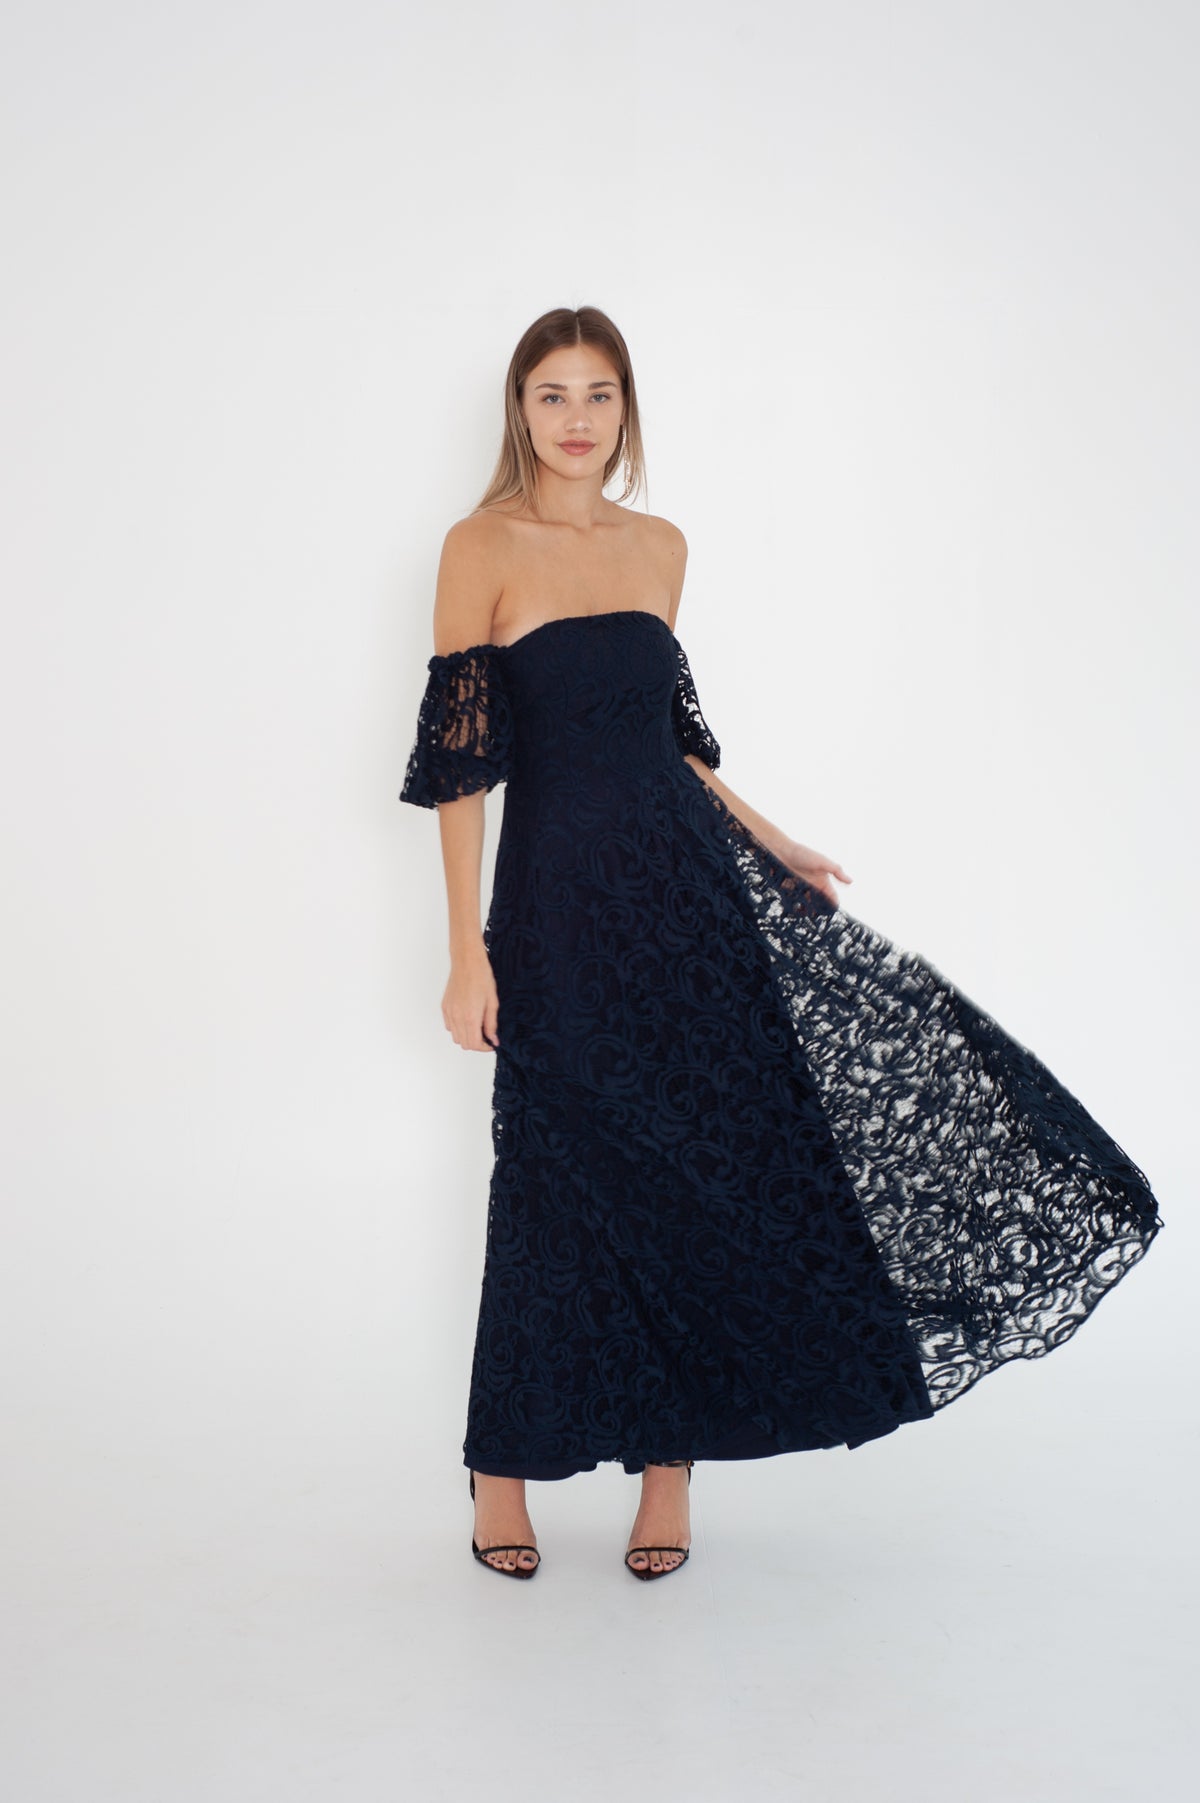 Dark blue lace dress with Off-the-shoulder sleeves